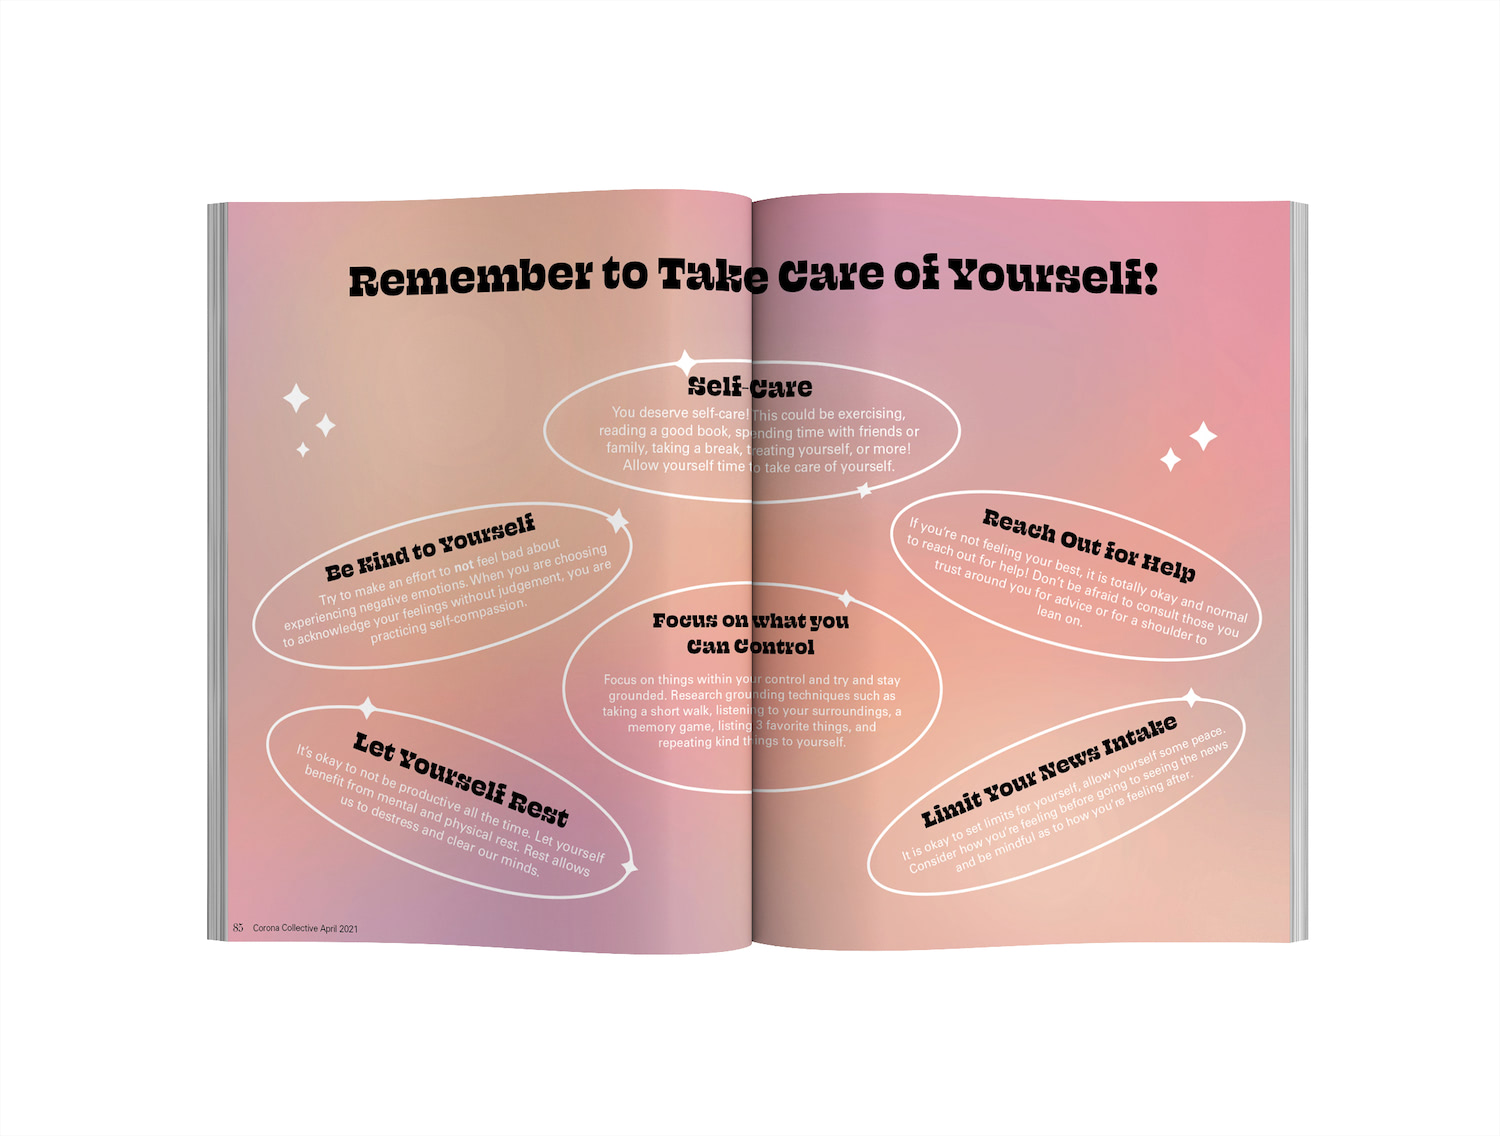 The background is a pink to yellow to purple gradient and it is smooth and calming. The white and black text on top of this gives advice on ways to take care of your mental health during Covid-19 and there are also small graphic sparkling diamonds surrounding the text.